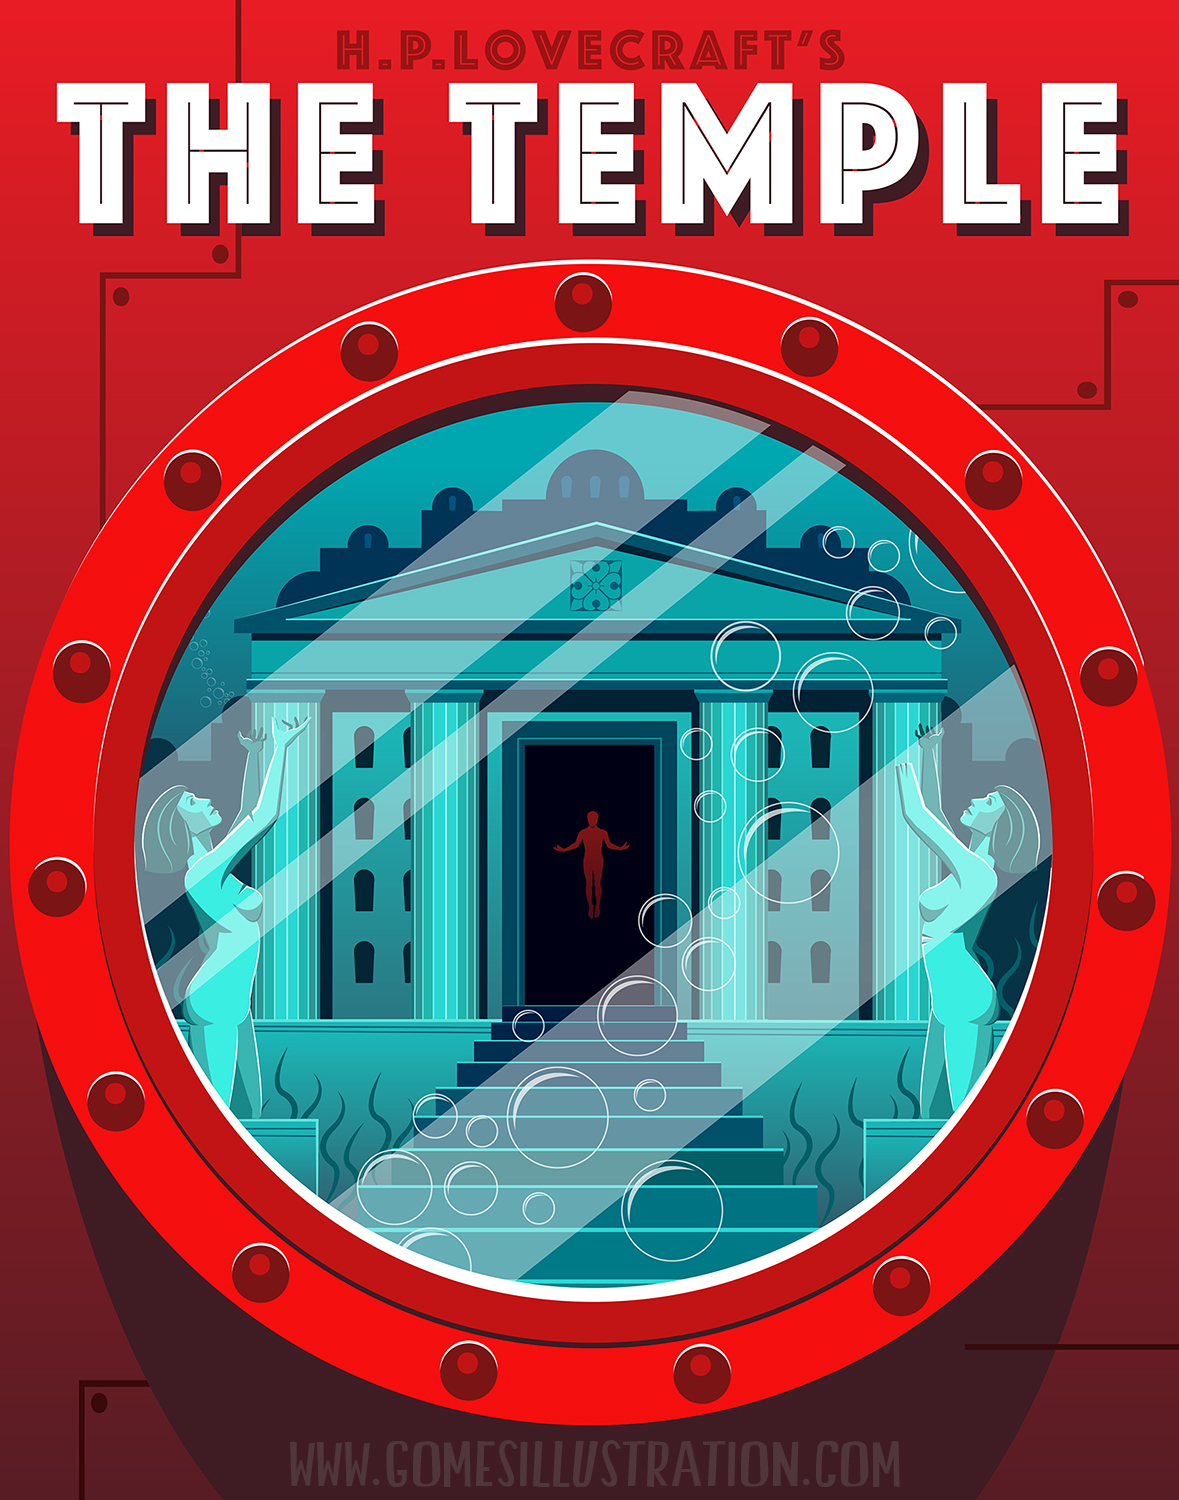 The Temple